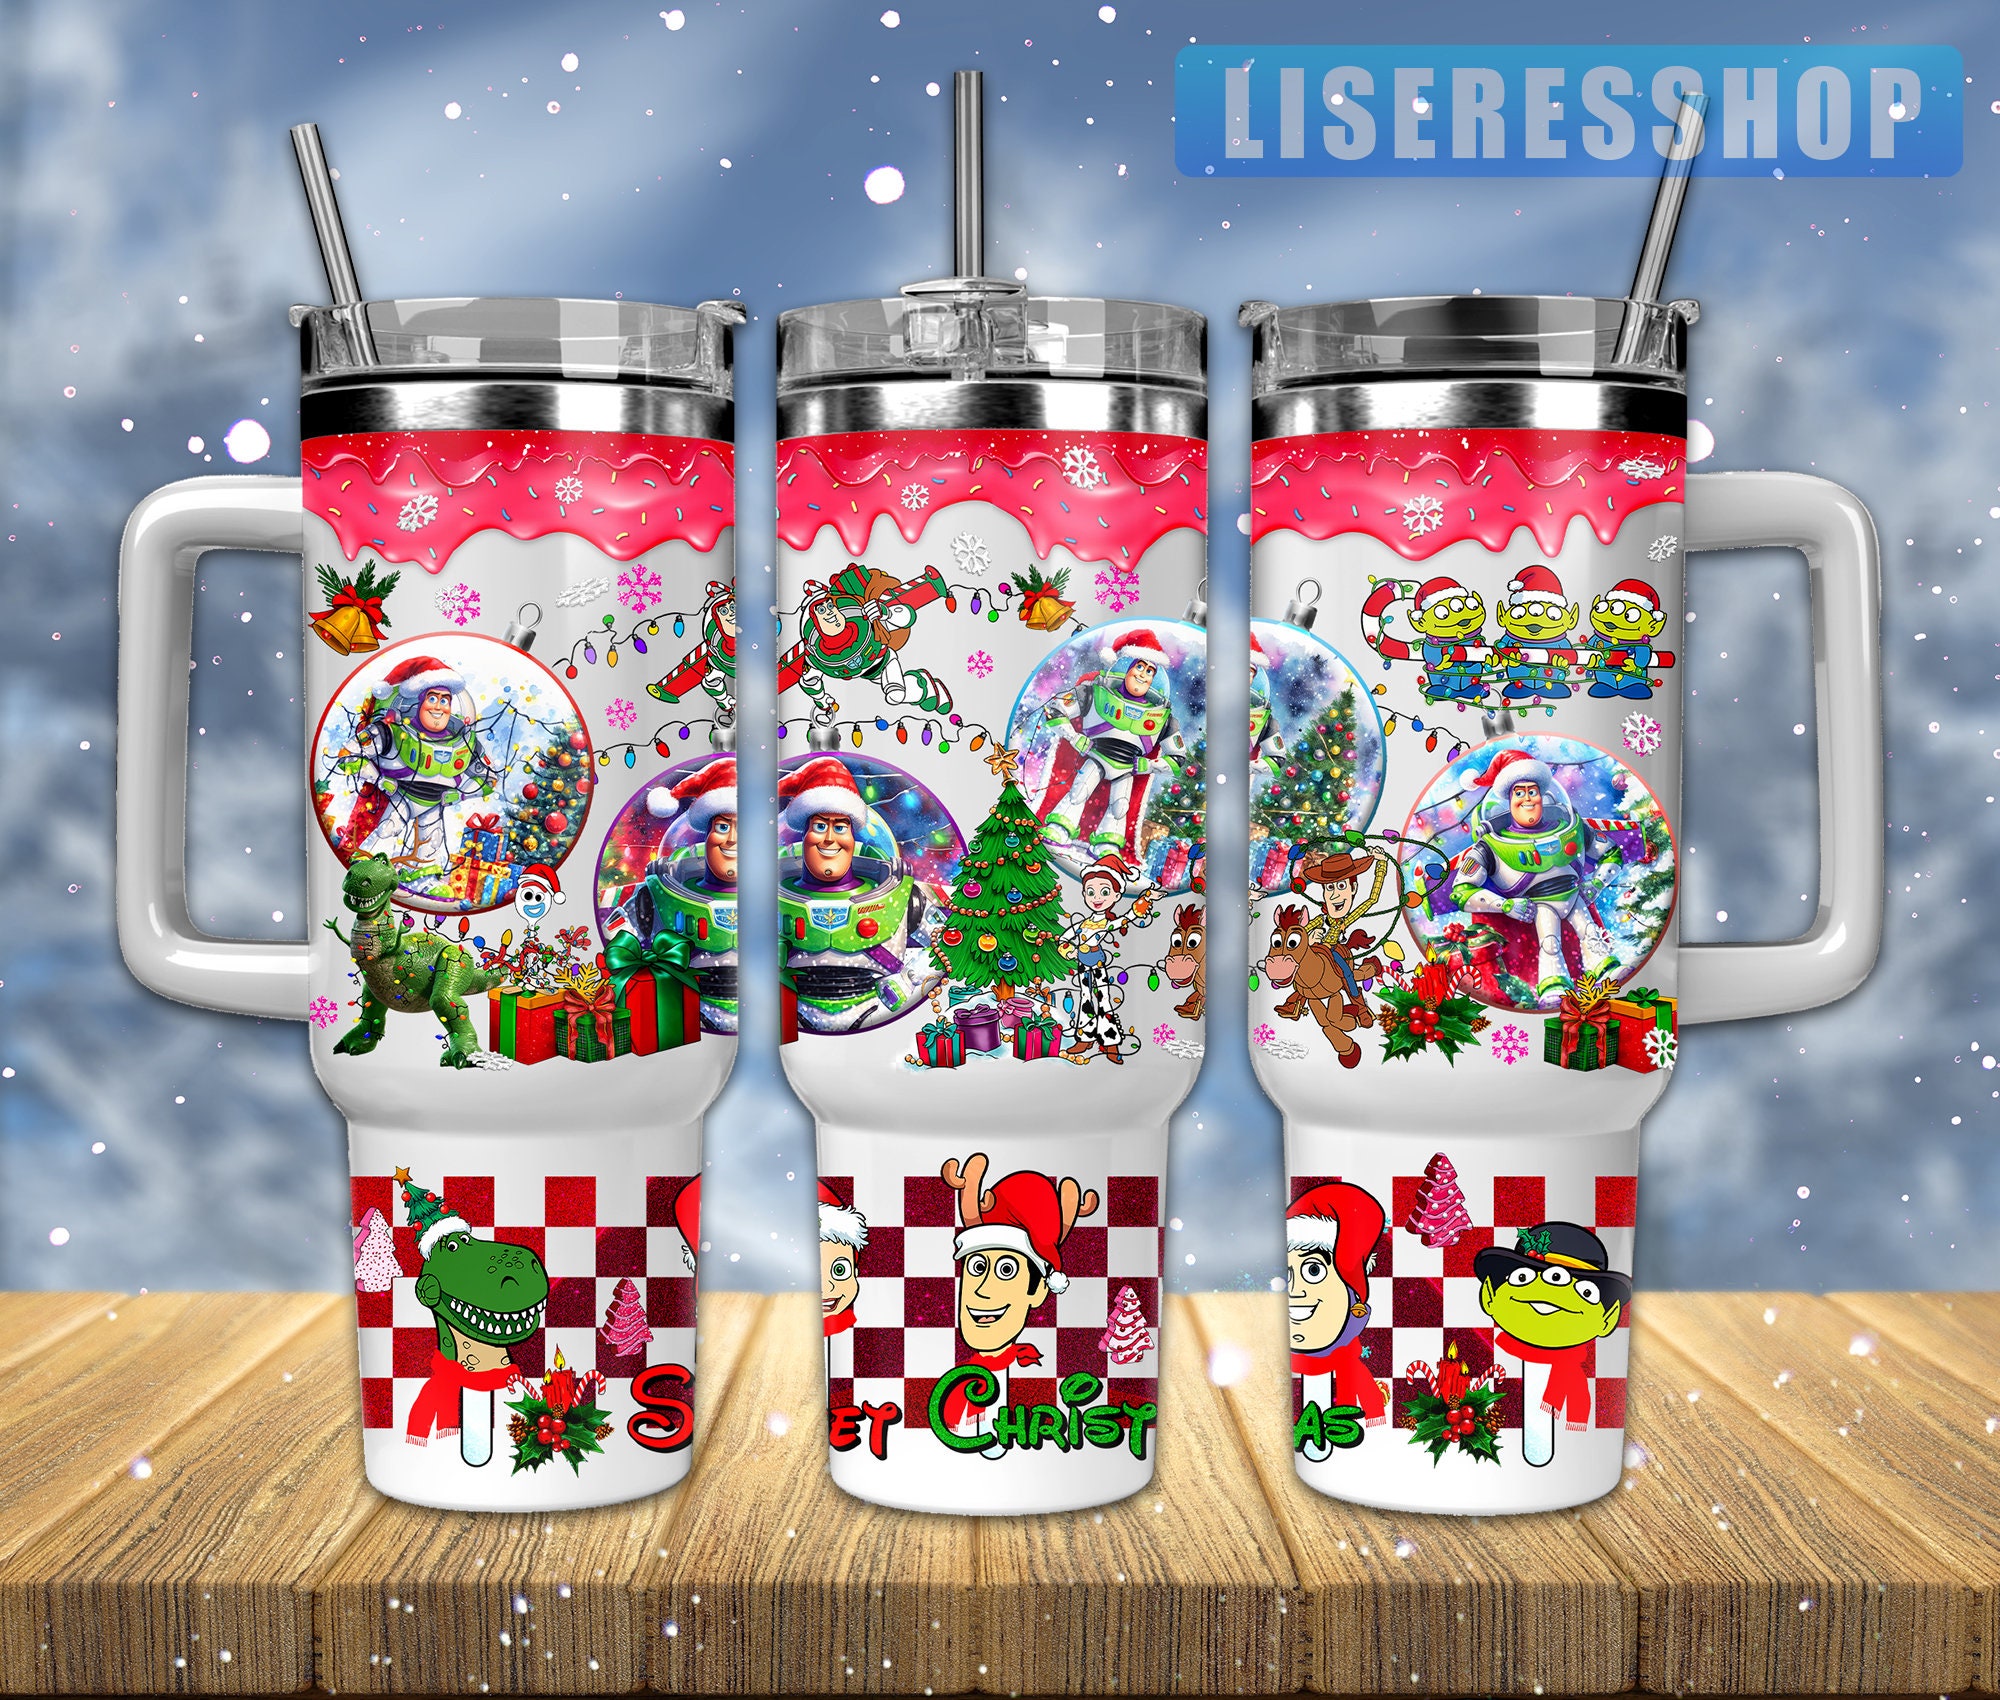 Navy Biggie Thirst Quencher Tumbler 40-Oz. with Straw - Personalization  Available